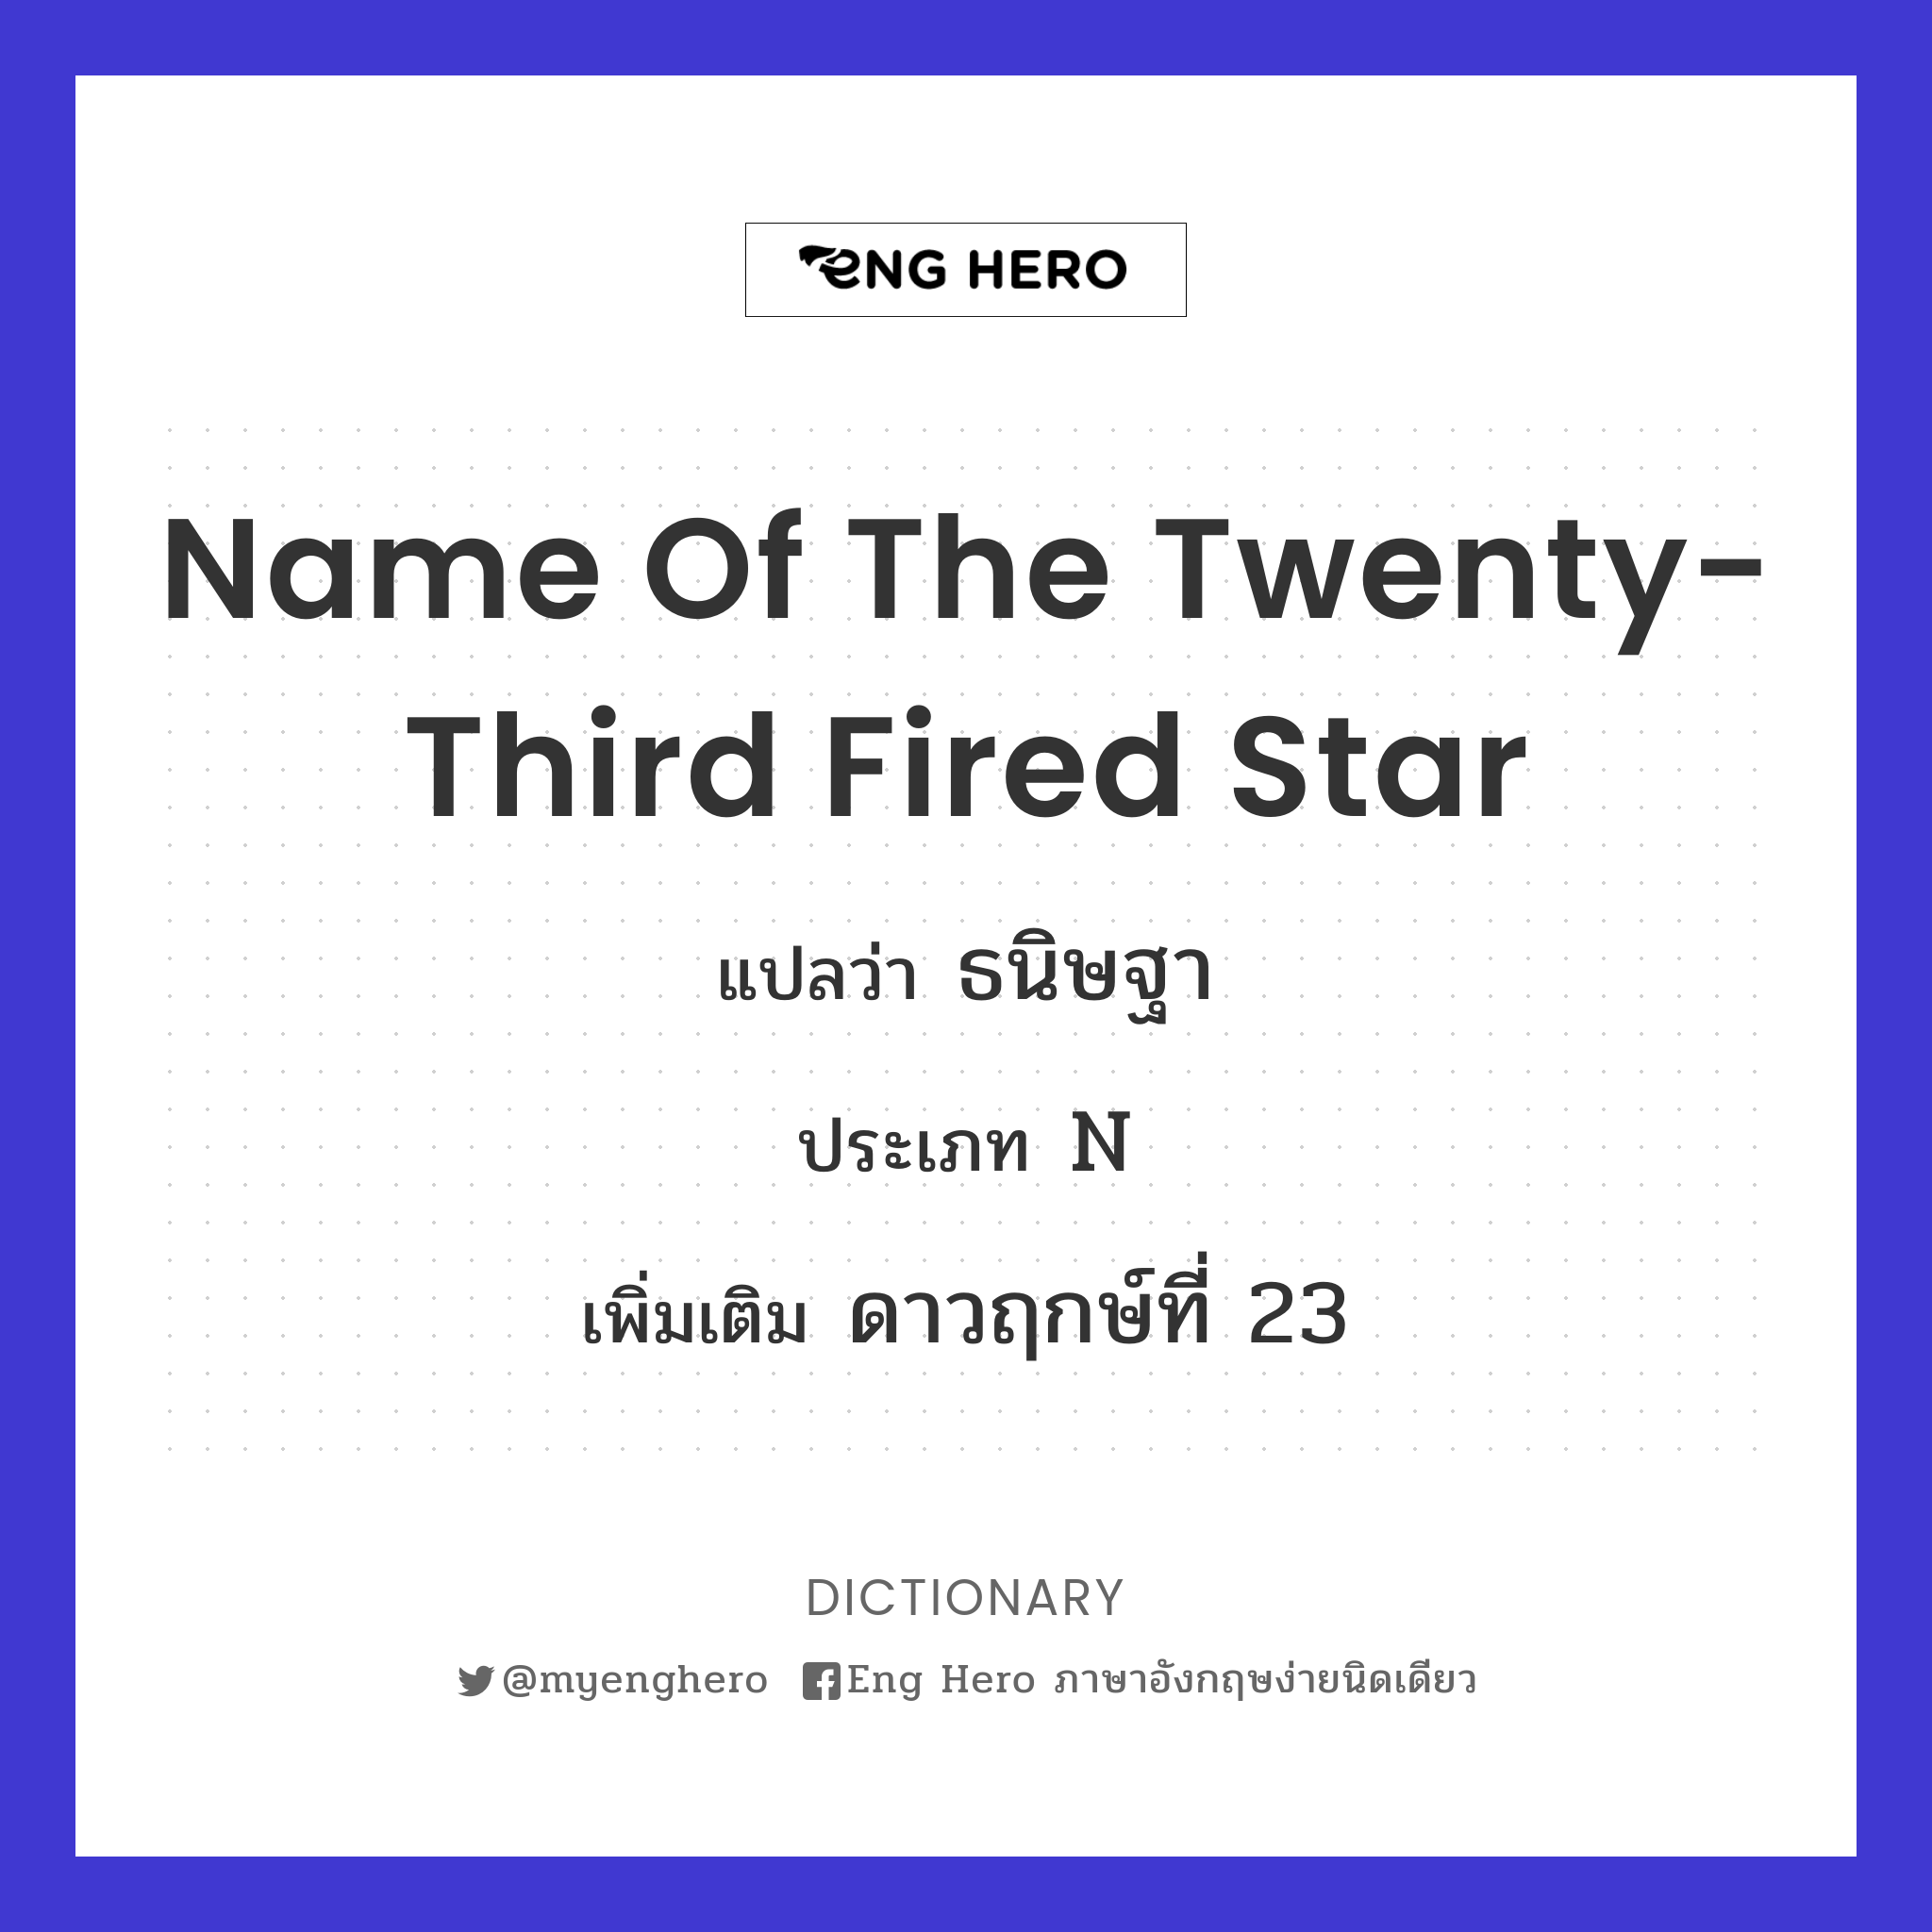 name of the twenty-third fired star